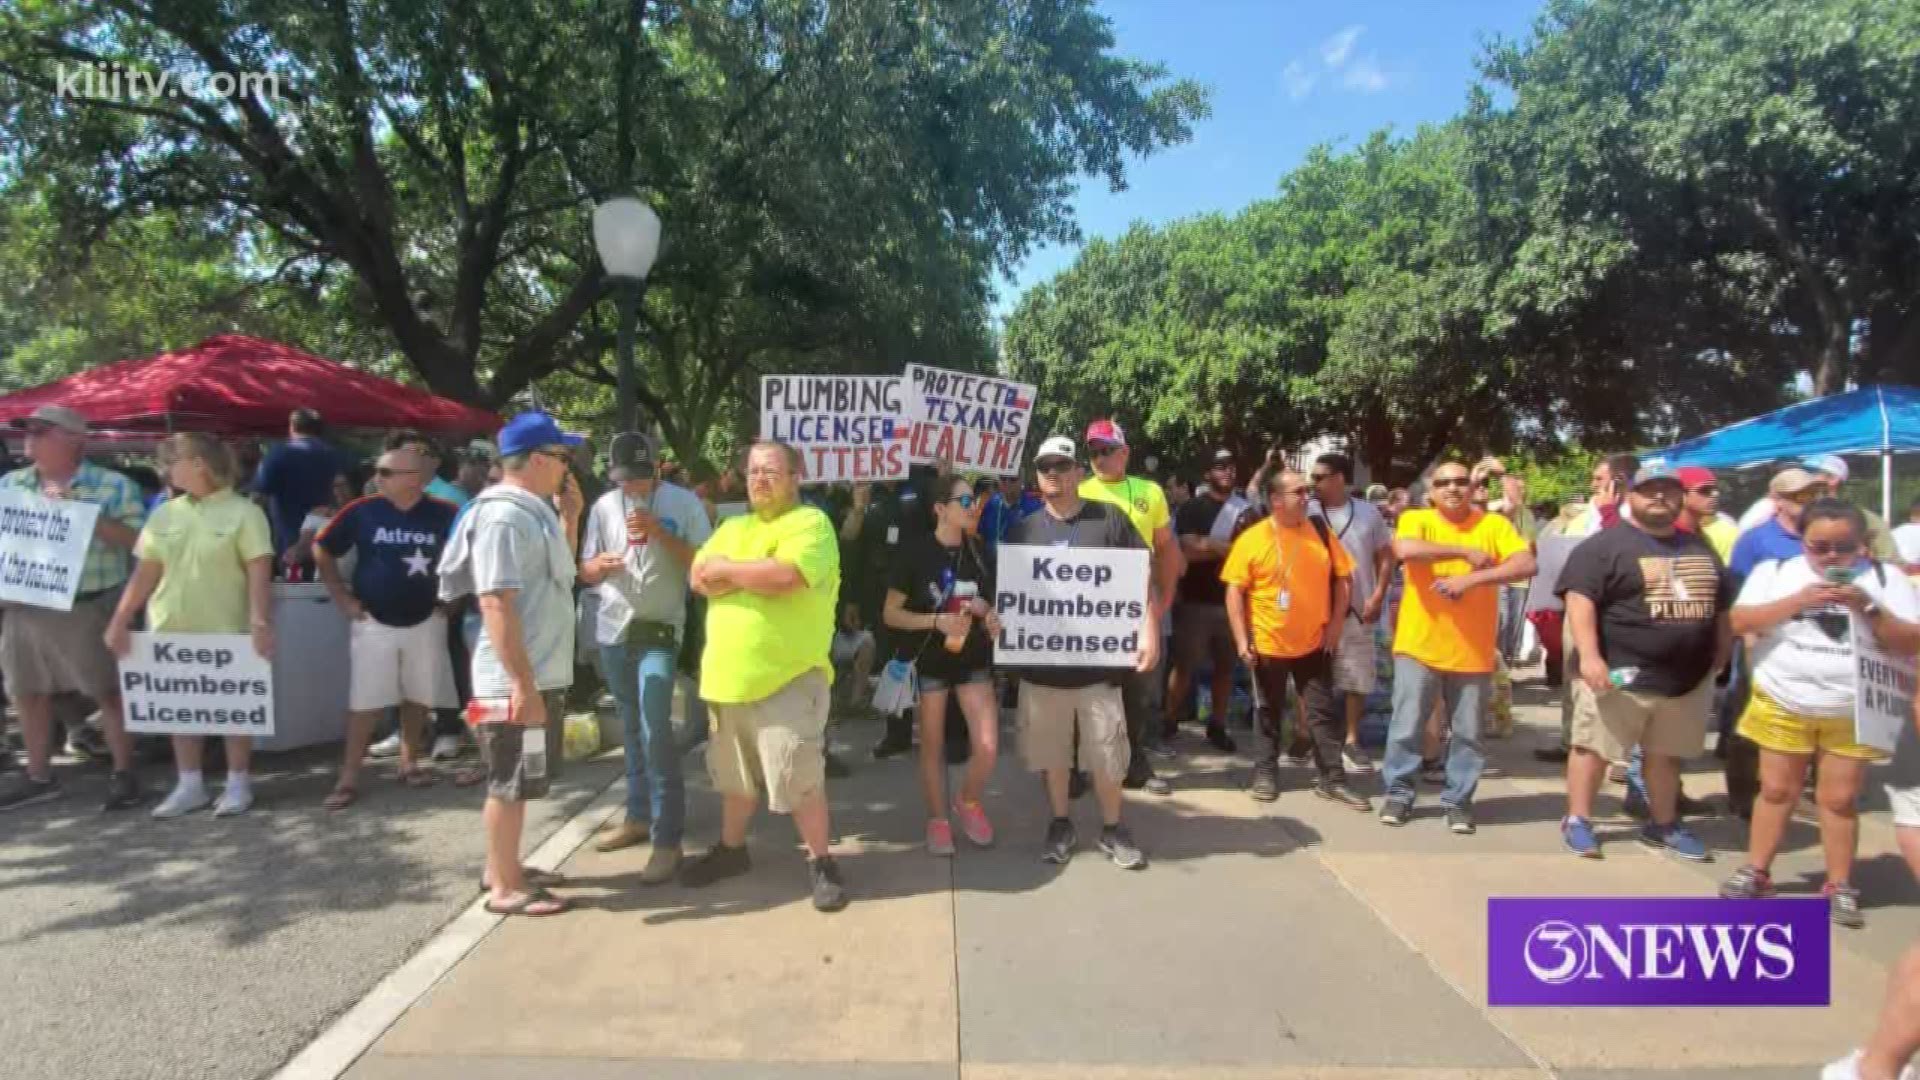 Thousands of plumbers from around the country gathered Friday morning for a rally in Austin, Texas.